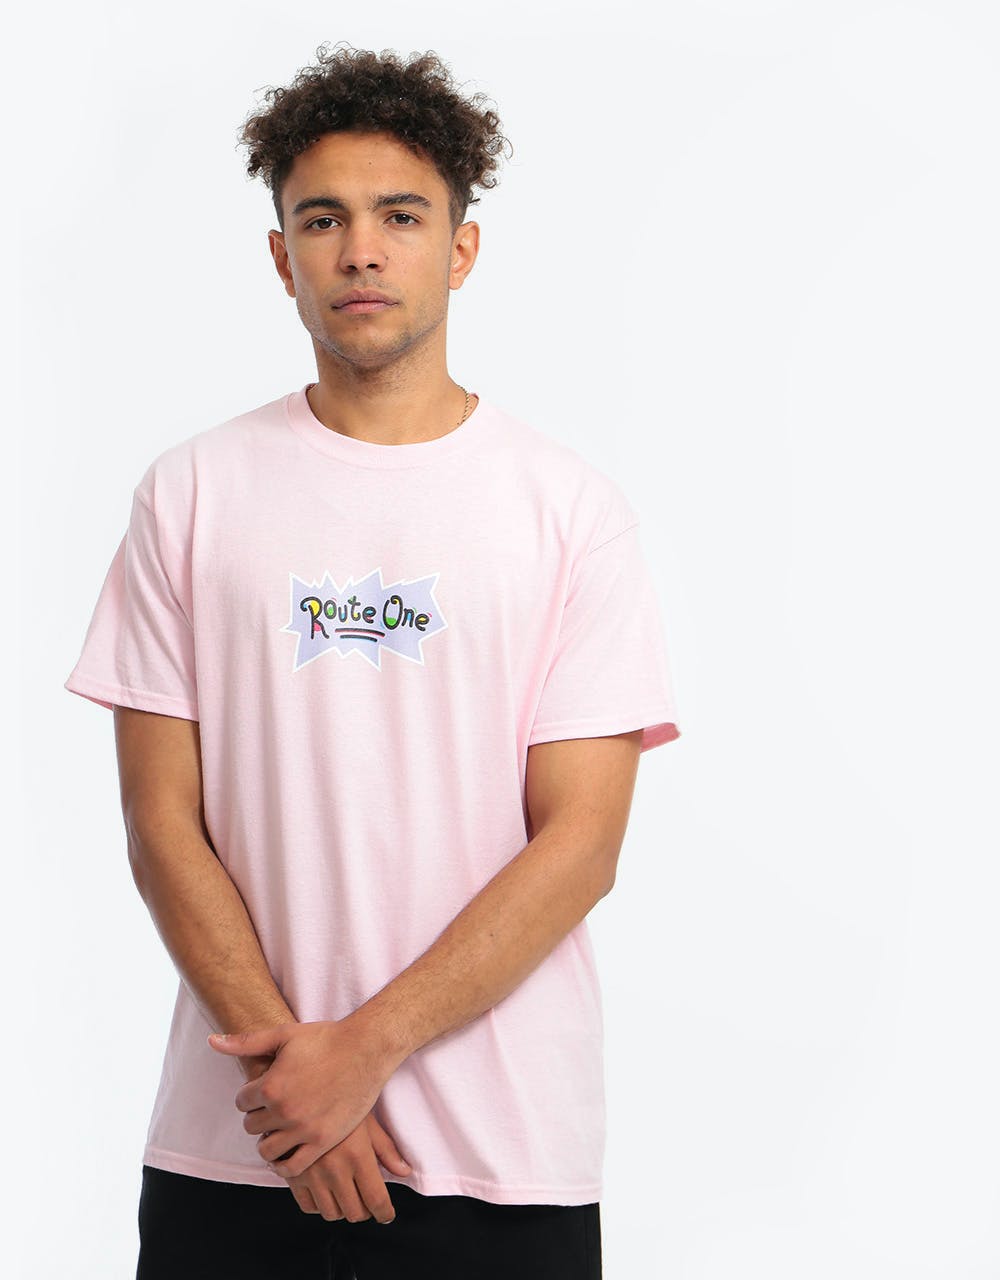 Route One Rugones T-Shirt - Light Pink